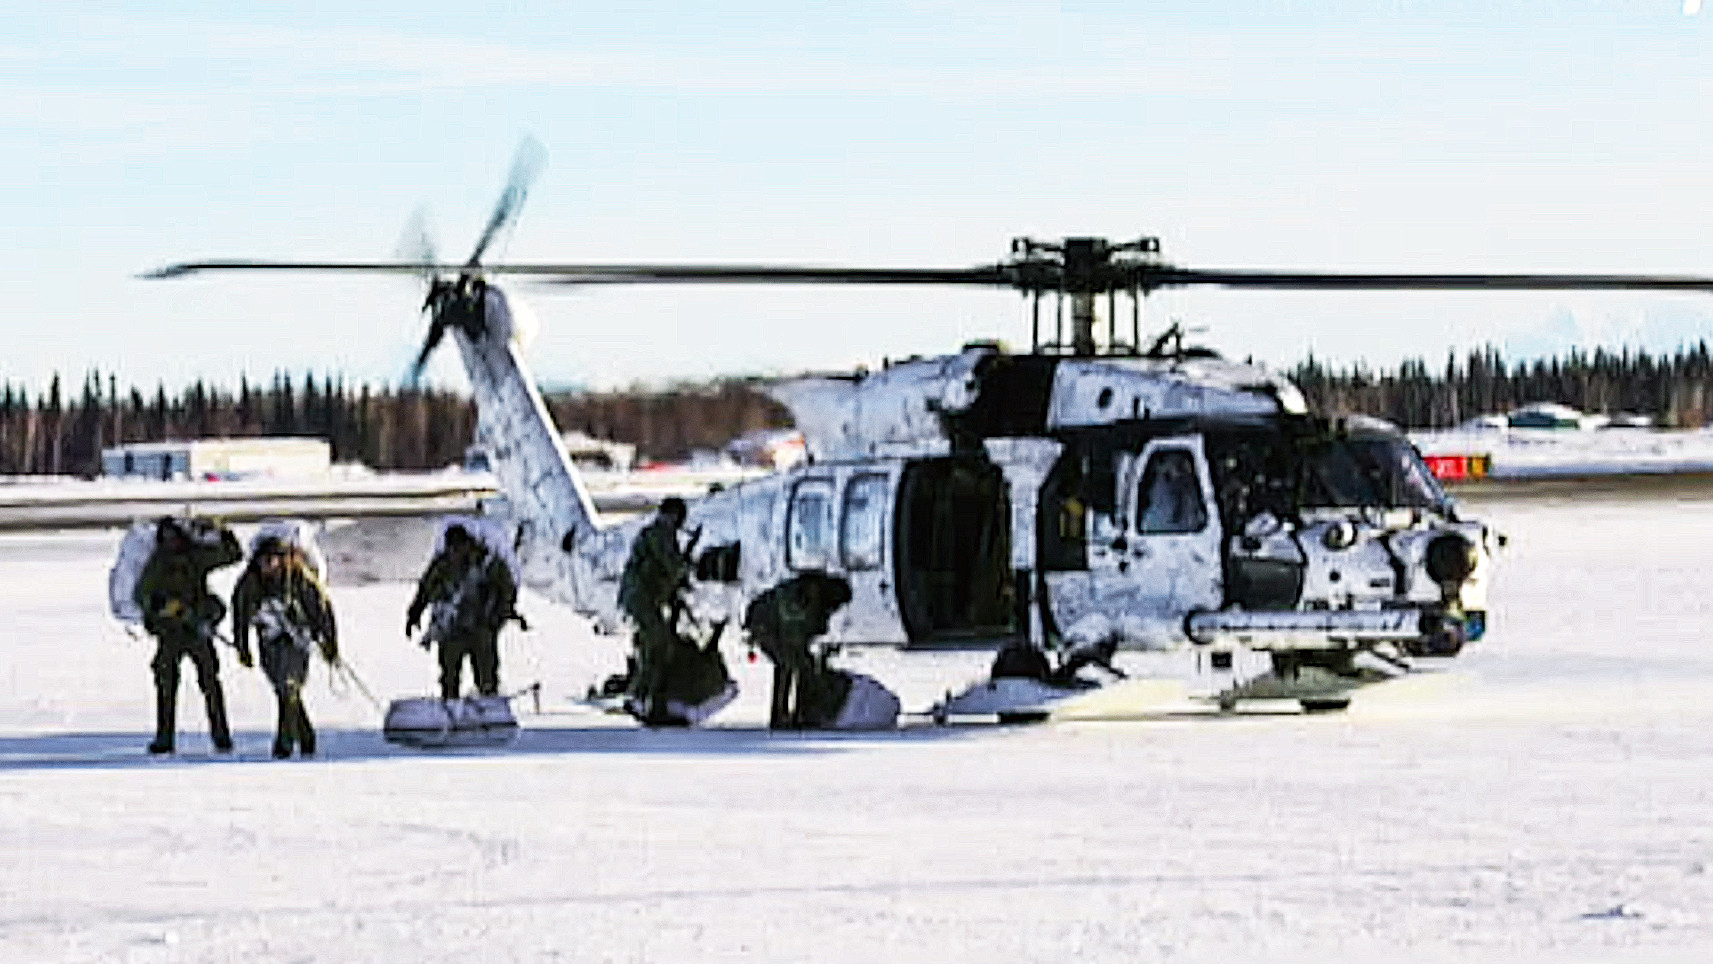 The US Army's elite 160th Special Operations Aviation Regiment has been testing Arctic and desert camouflage options on top of a now well-known multi-tone blue scheme.